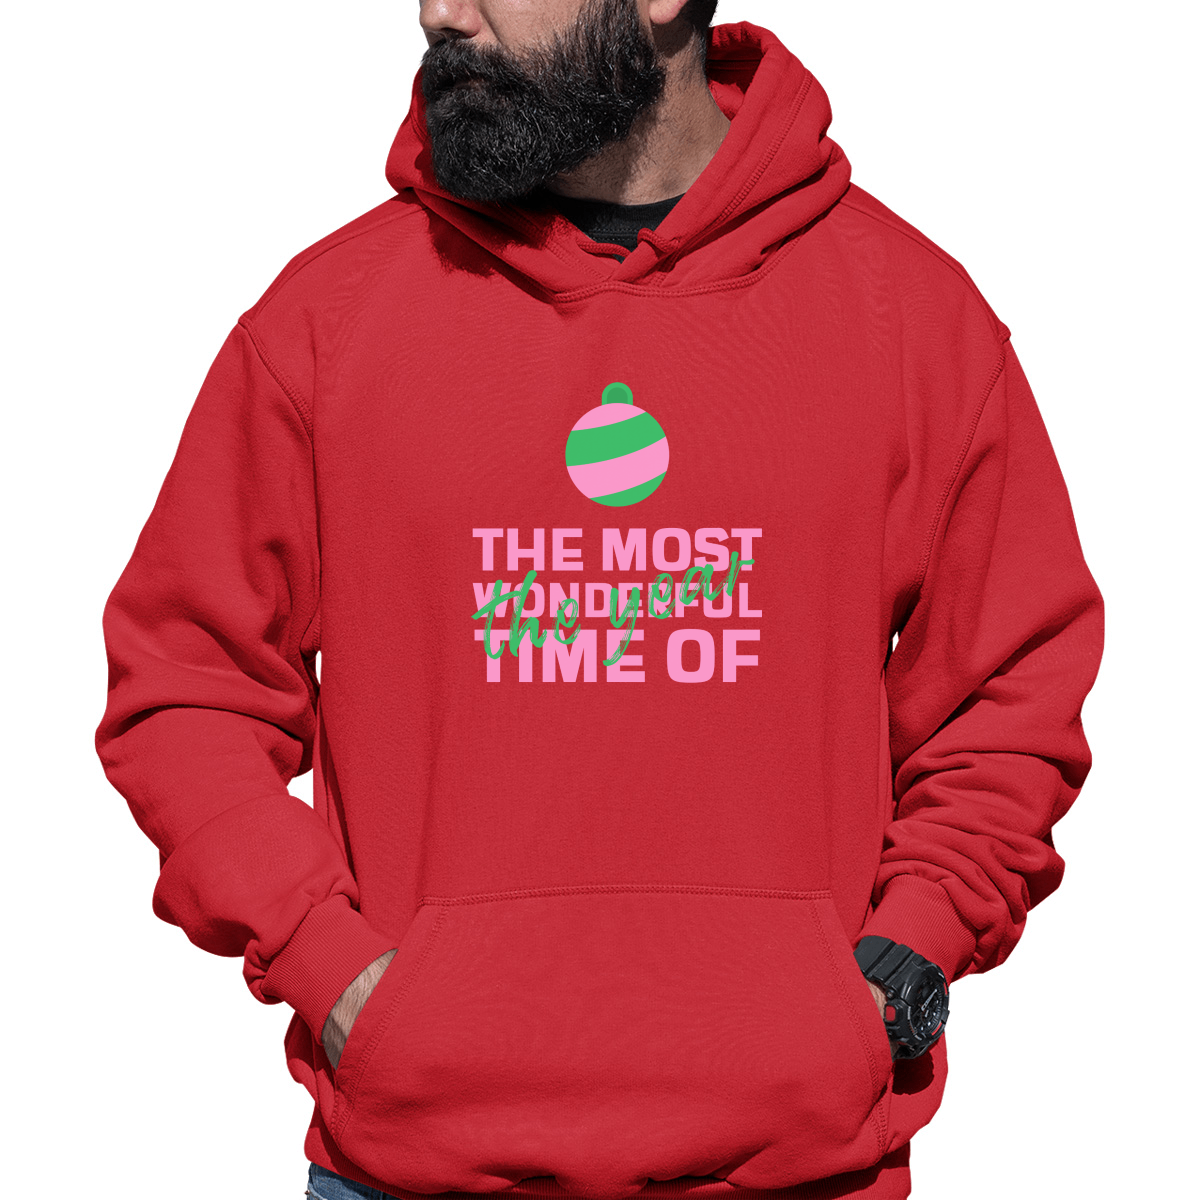 The Most Wonderful Time of the Year Unisex Hoodie | Red